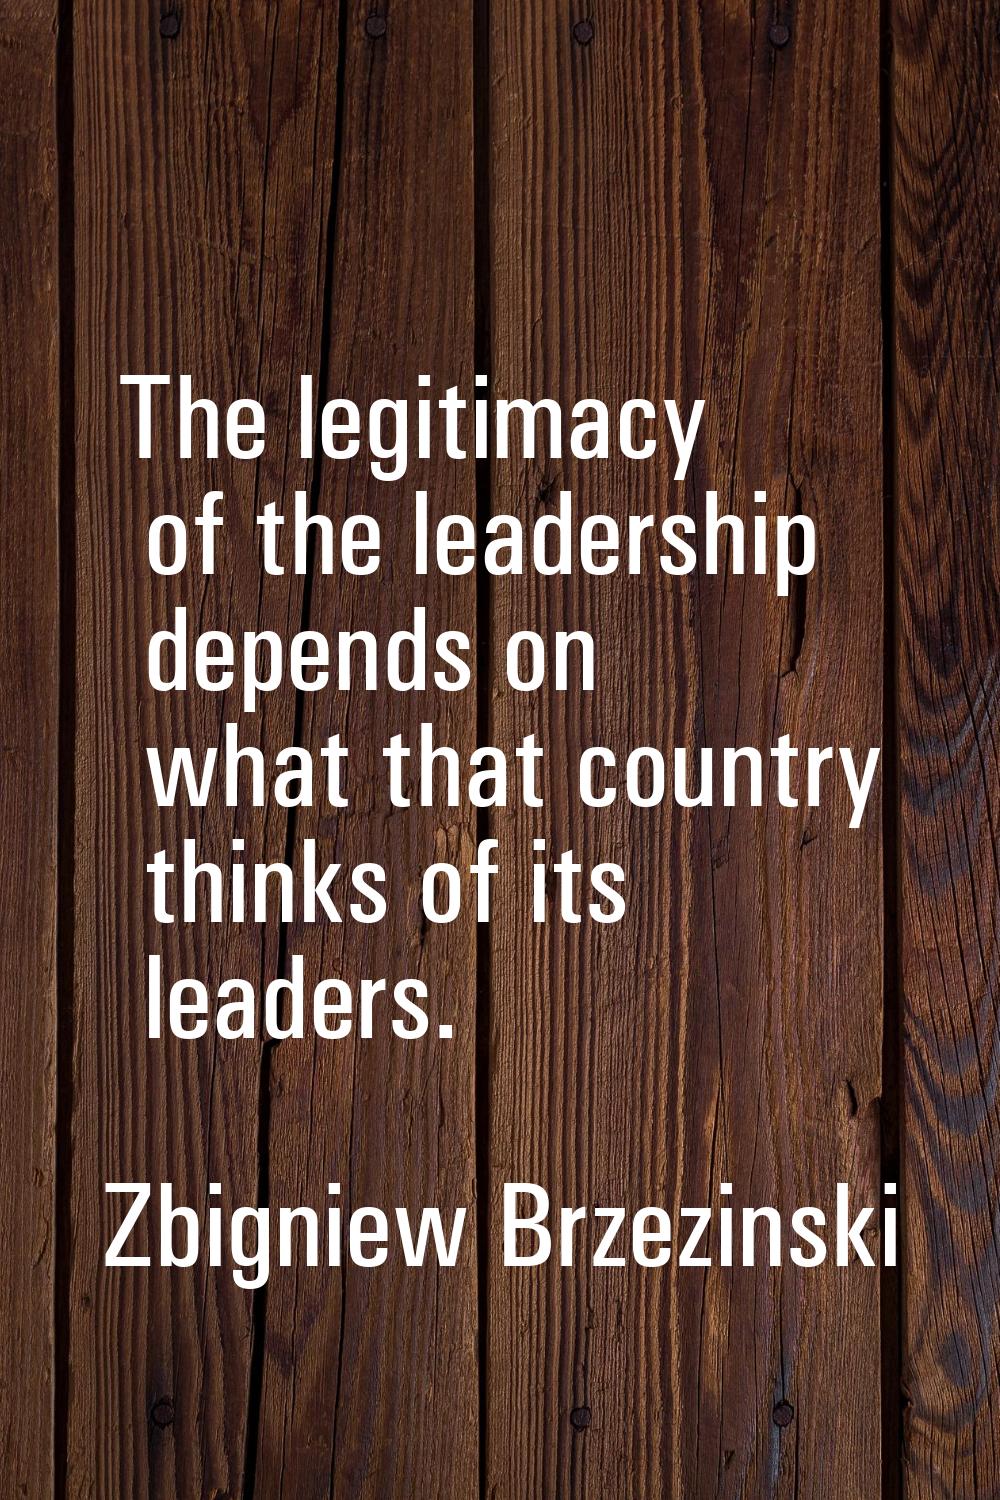 The legitimacy of the leadership depends on what that country thinks of its leaders.